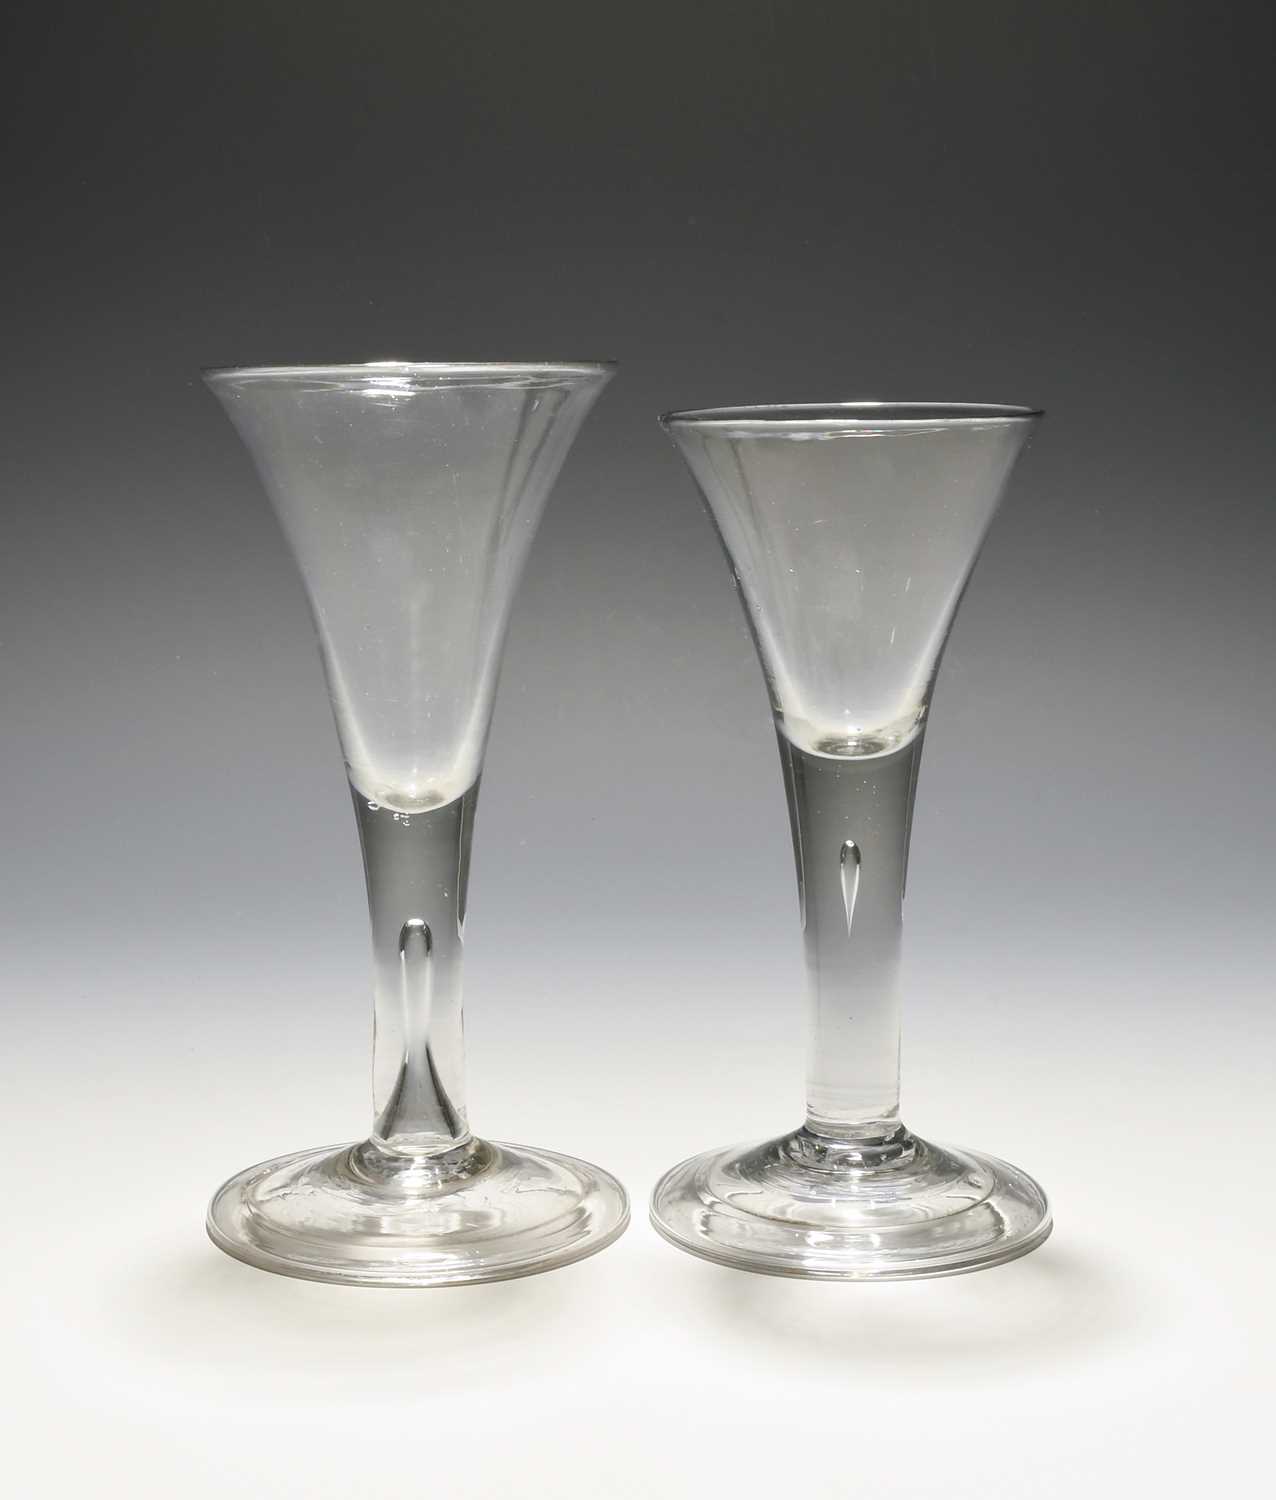 Two wine glasses, c.1740-50, with drawn trumpet bowls rising from plain teared stems over folded